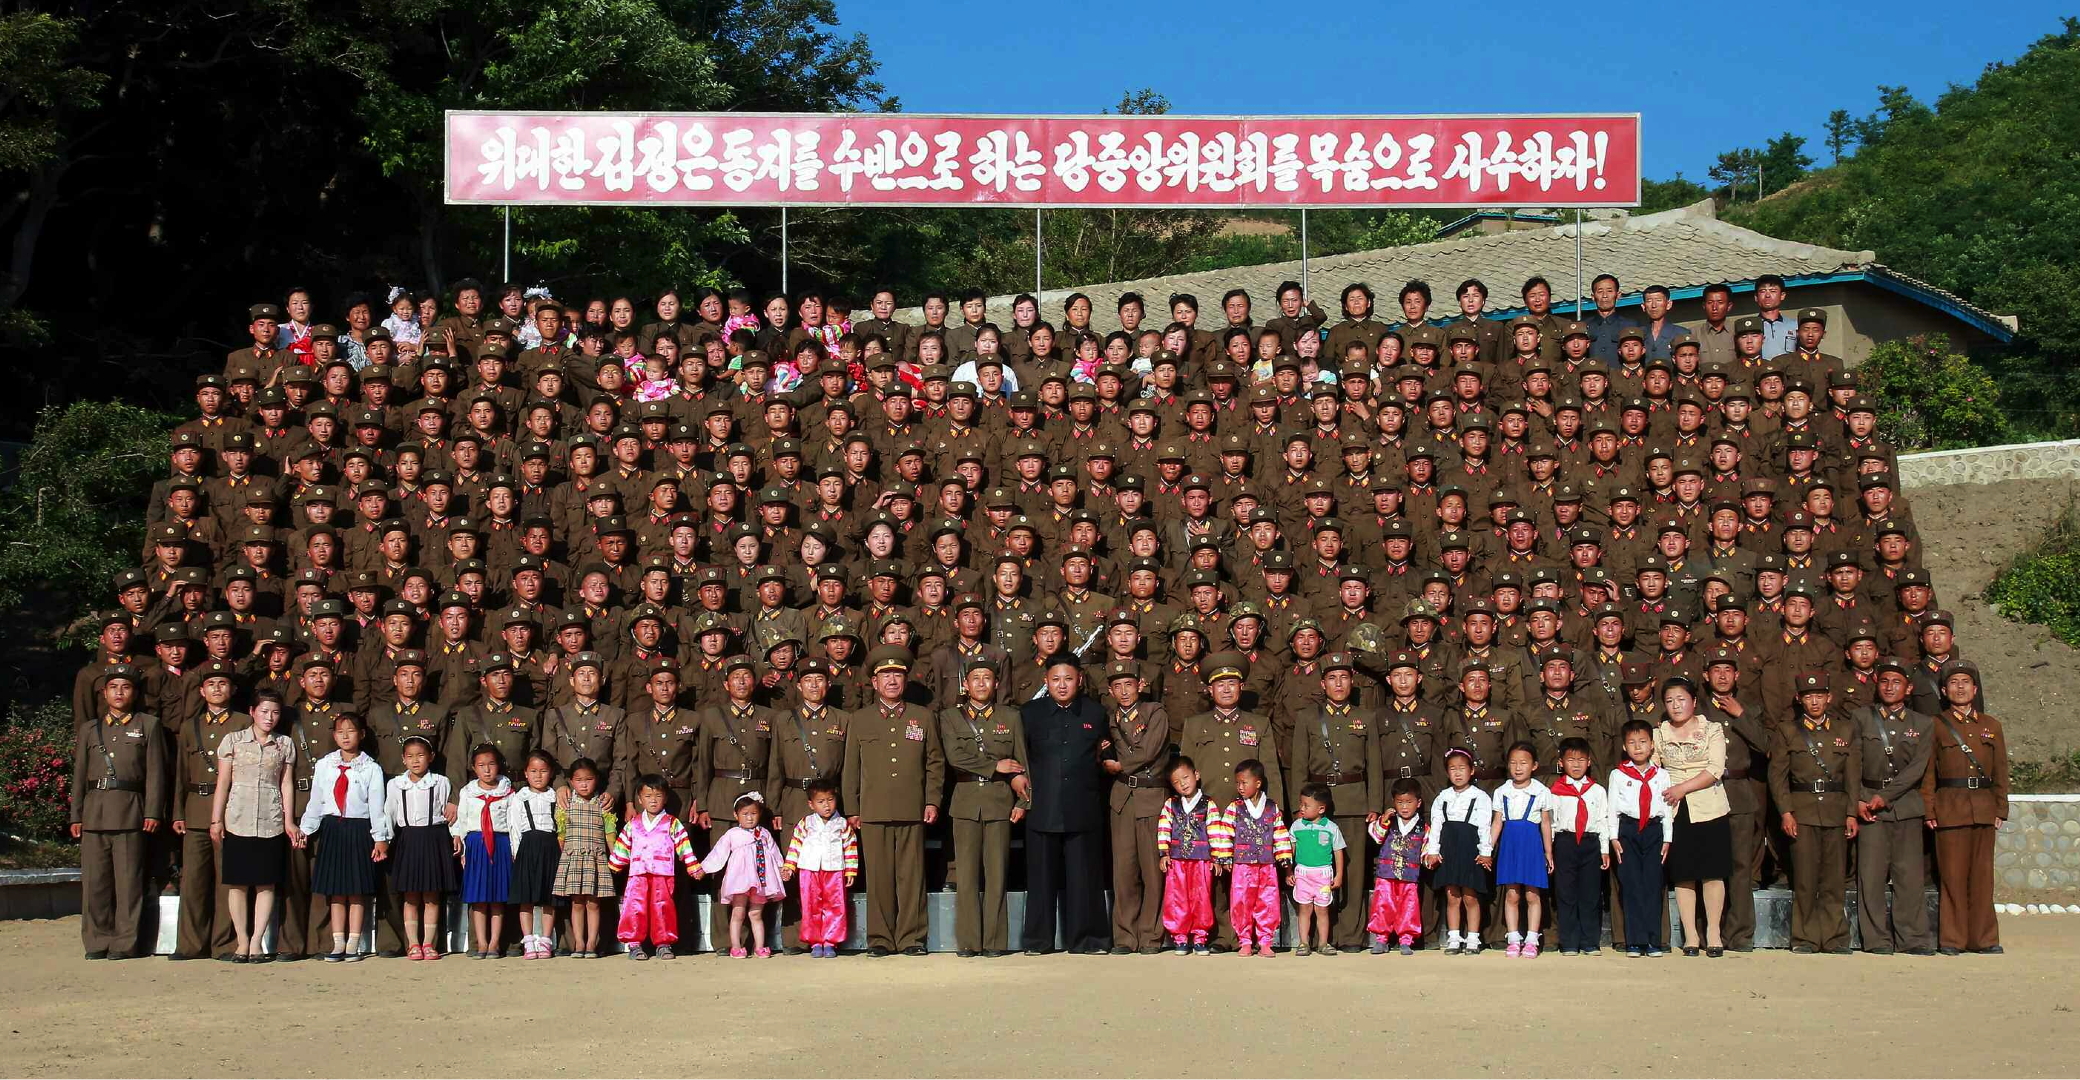 Kim Jong Un poses for a commemorative photo with officers, service members and military families stationed on Ung Islet (Photo: Rodong Sinmun).